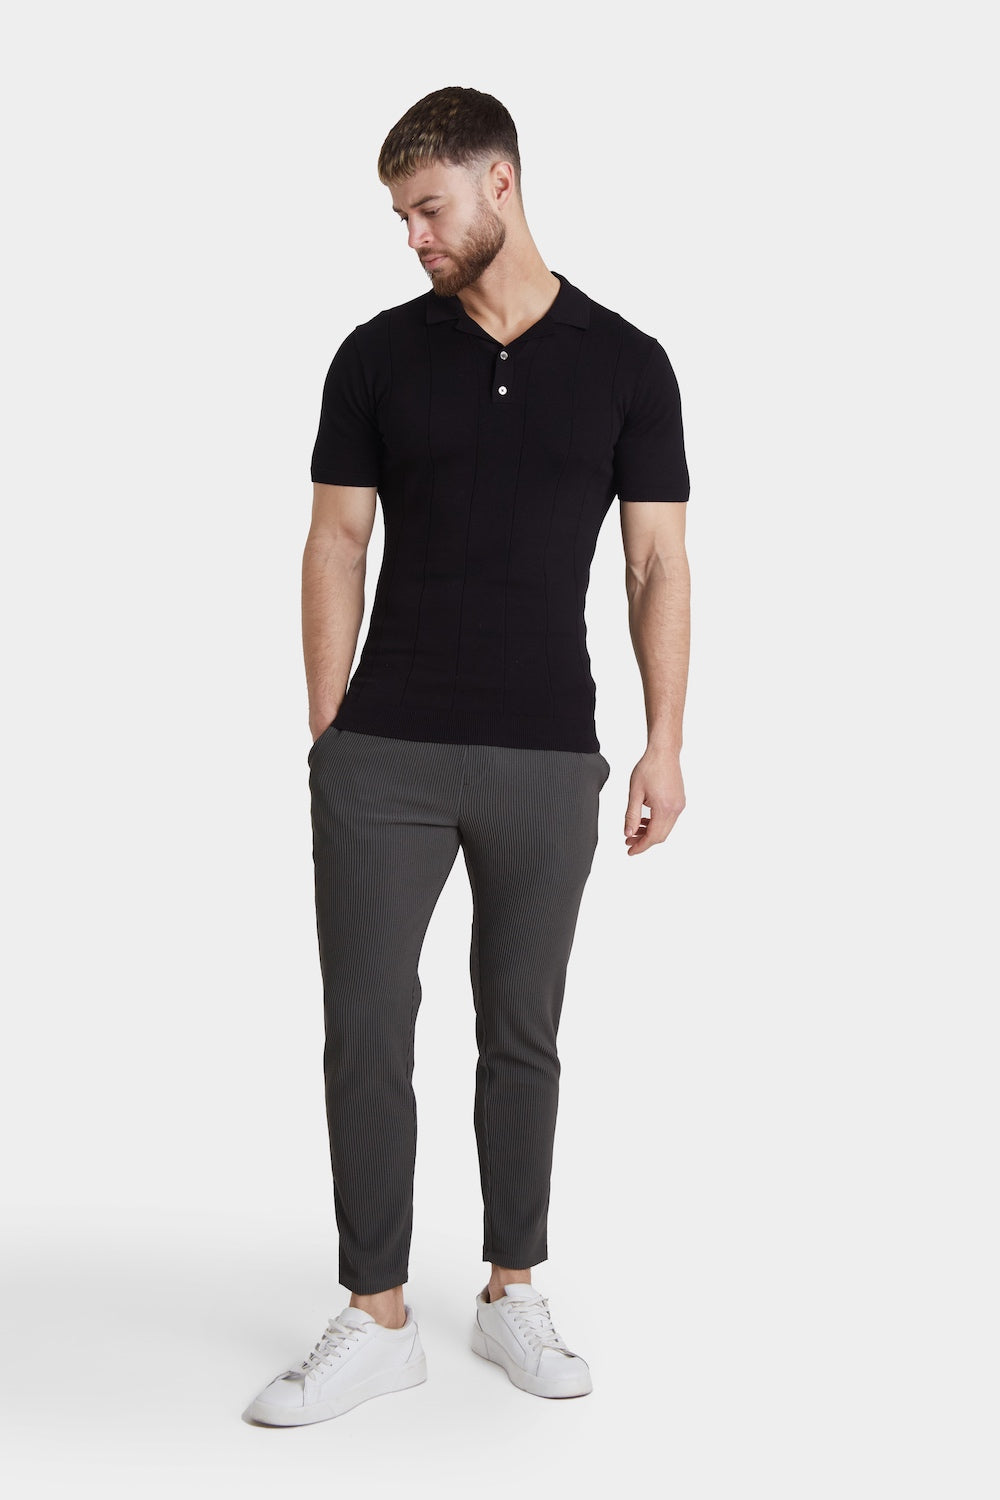 Textured Trouser in Charcoal - TAILORED ATHLETE - ROW